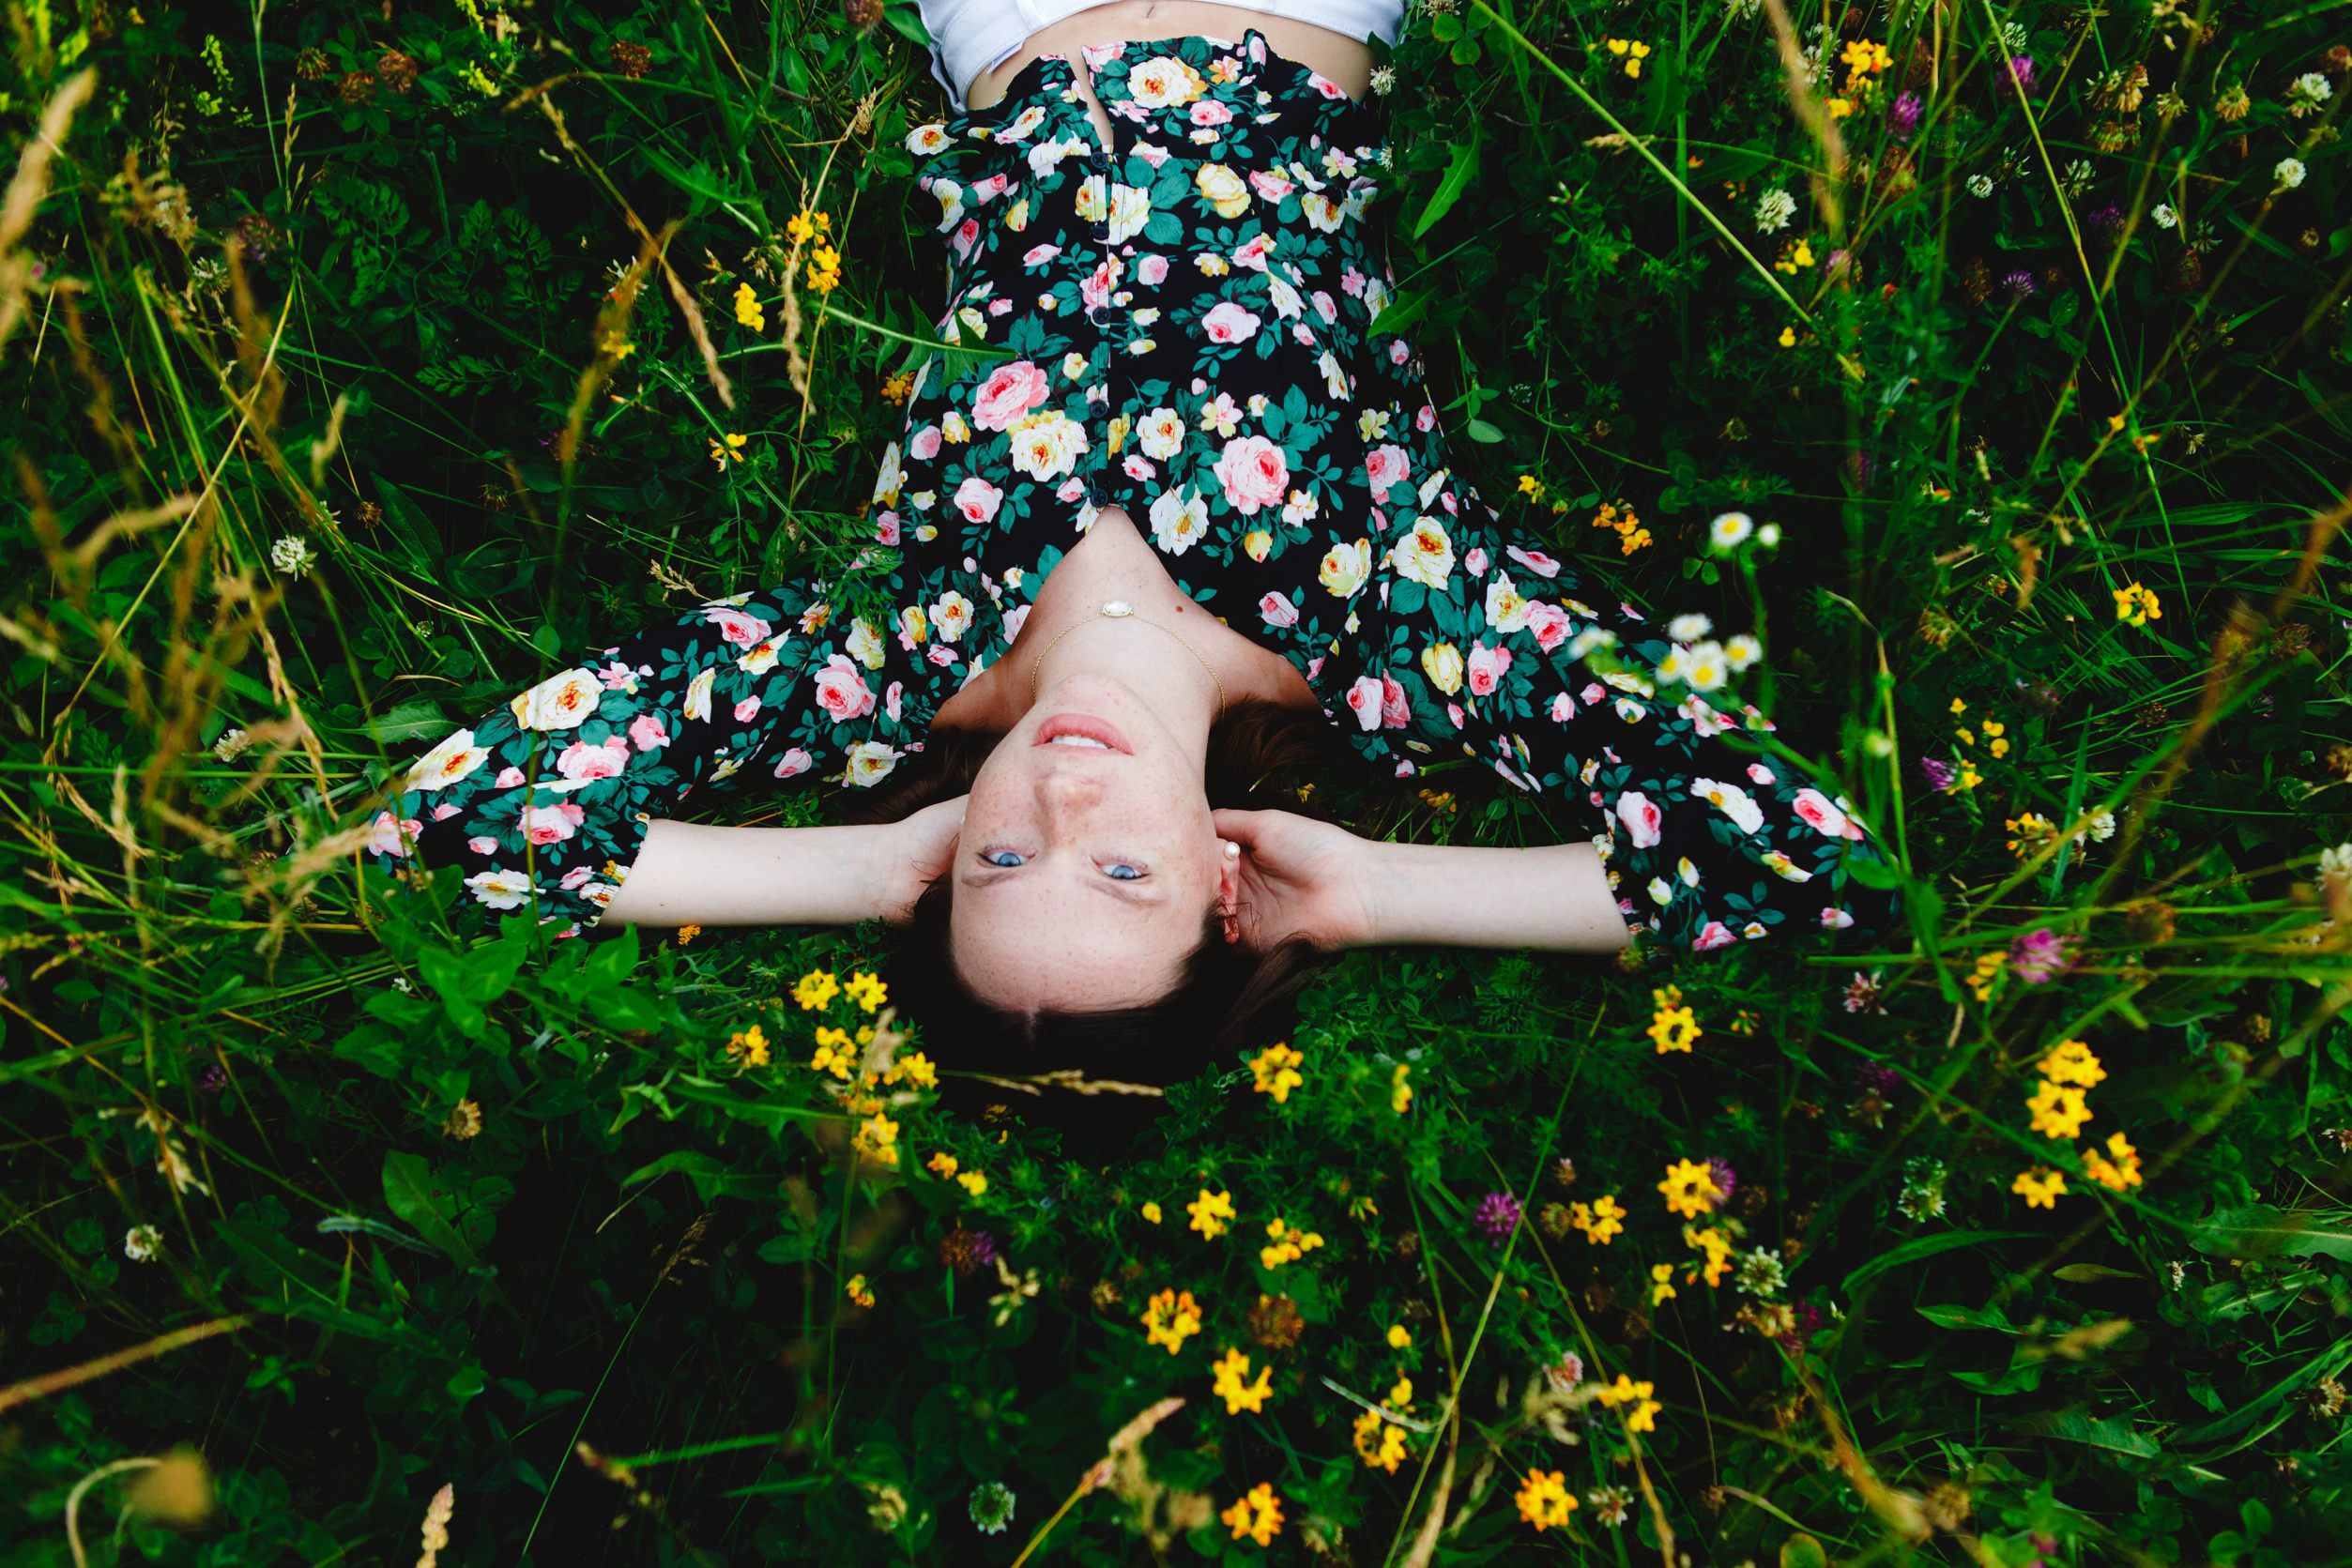 Brunette girl in a floral top laying in a field of flowers